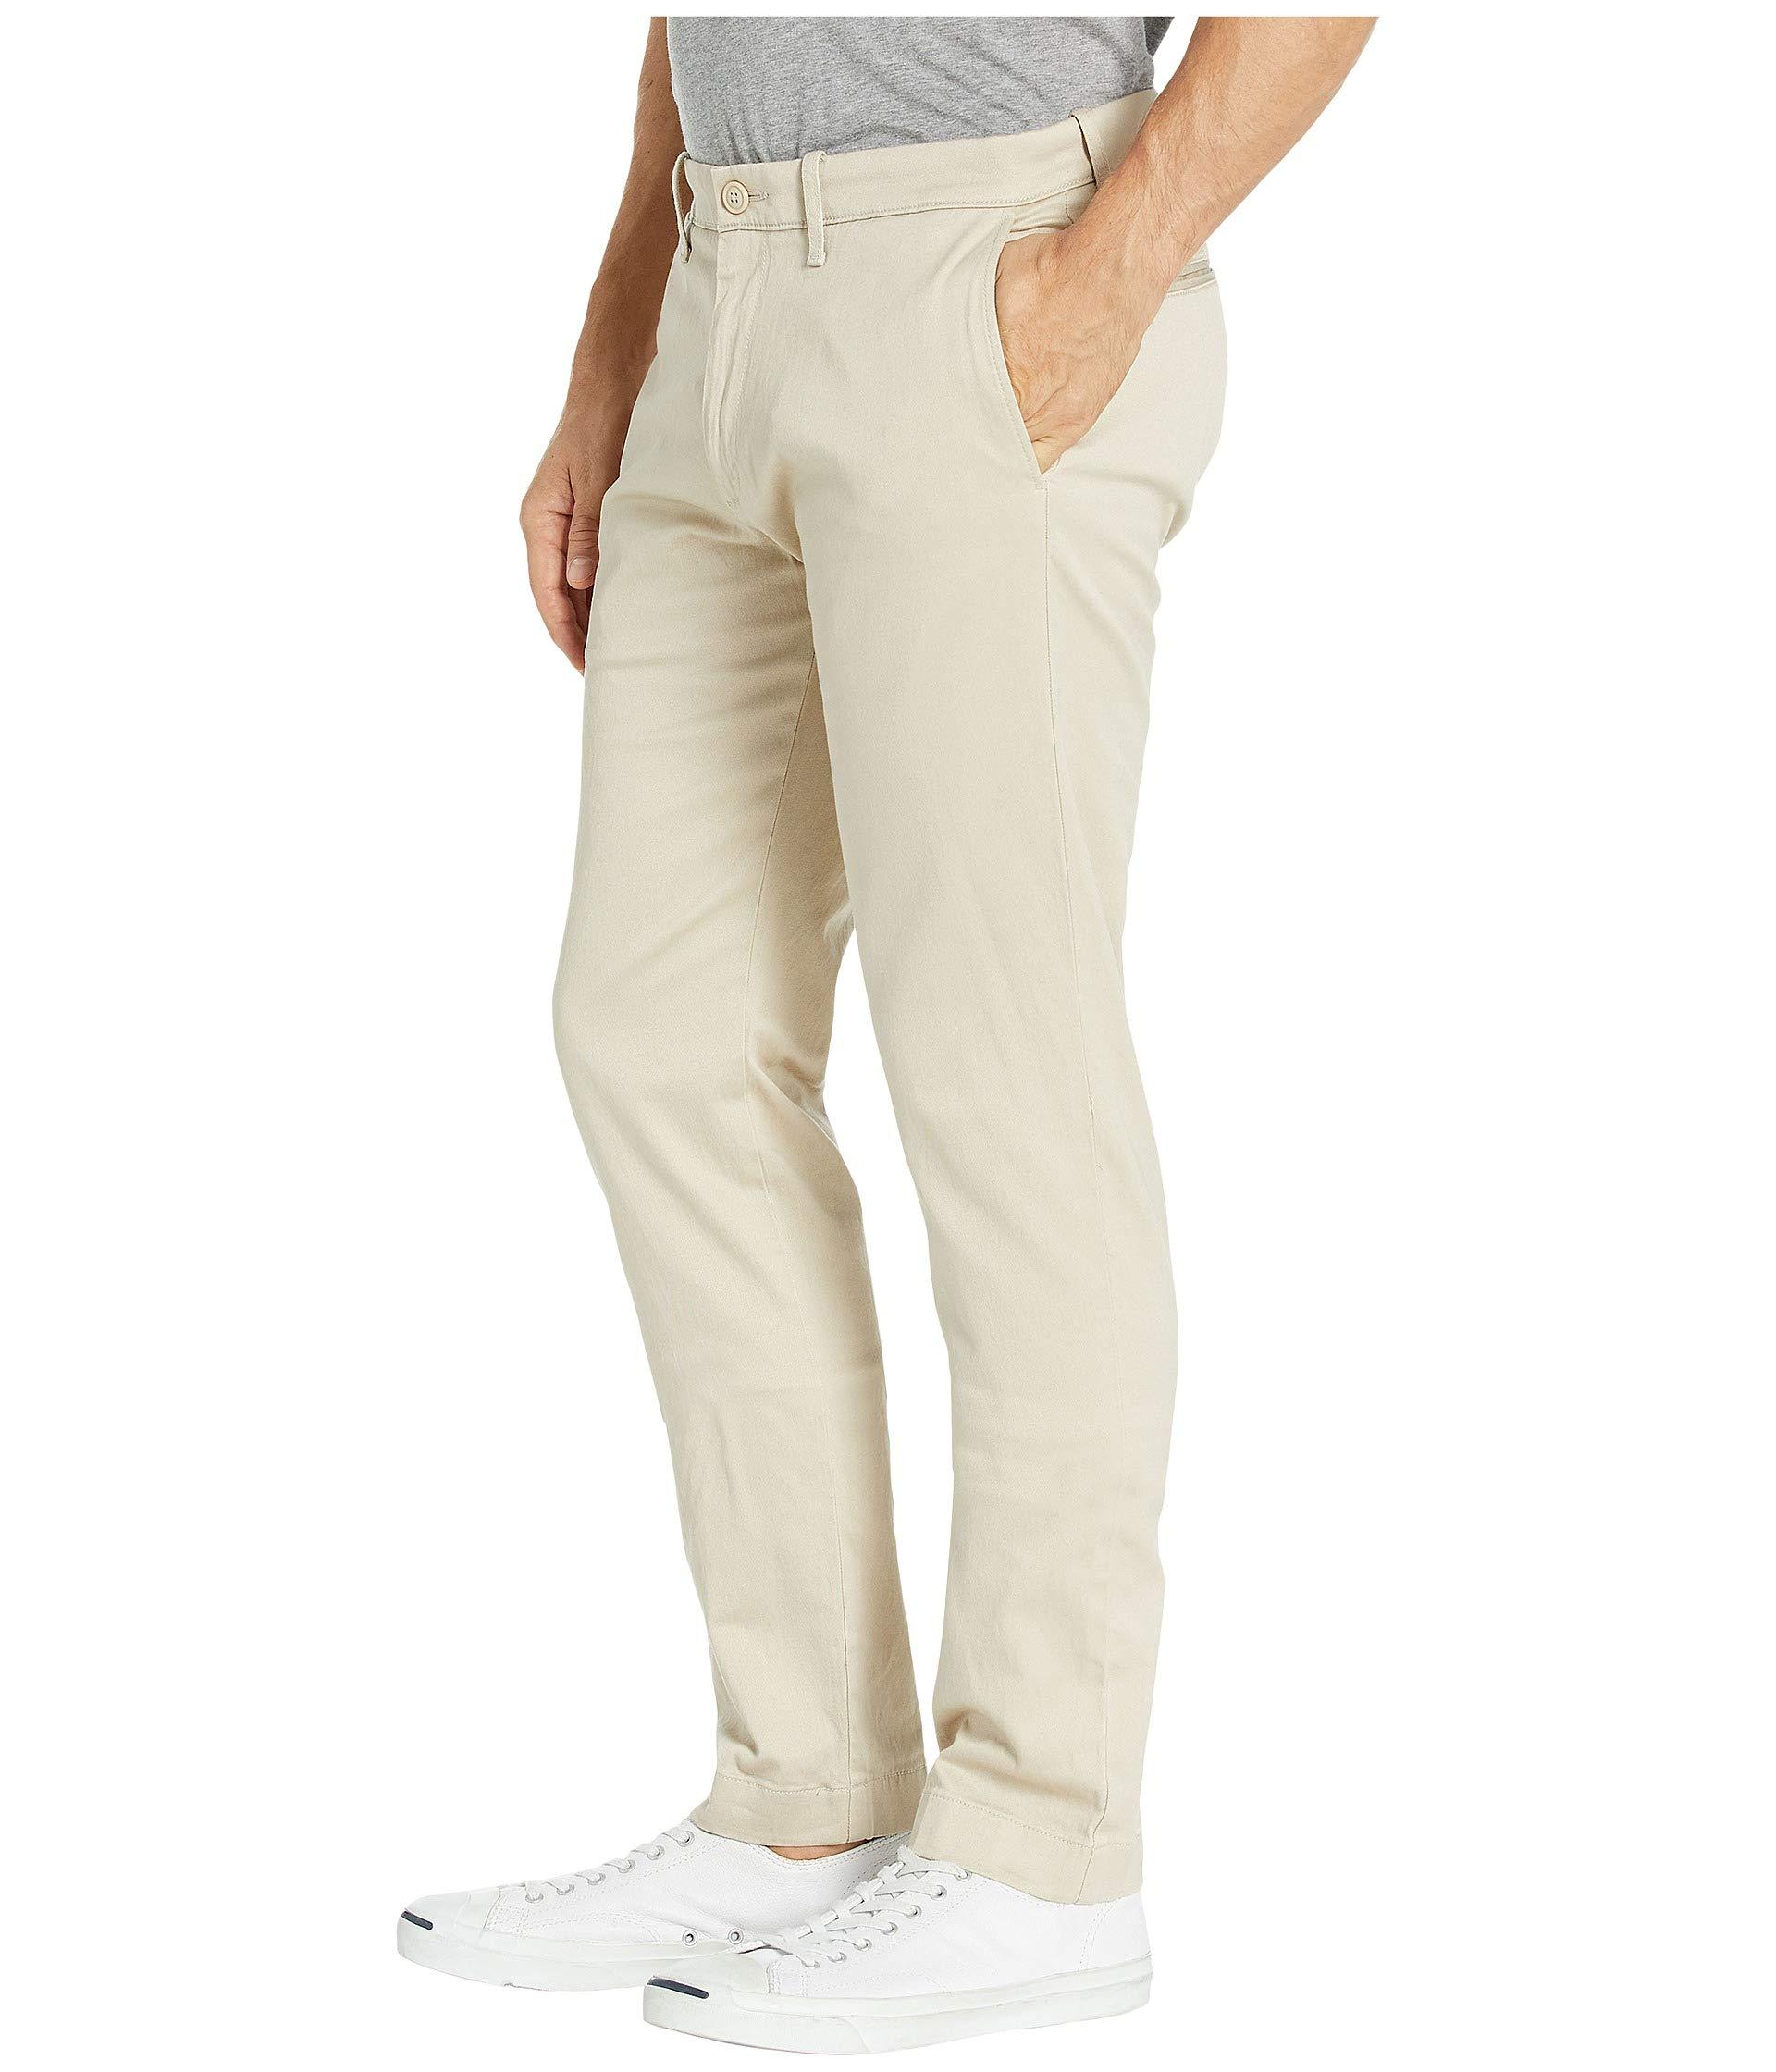 J.Crew Cotton 484 Slim-fit Pant In Stretch Chino in White for Men - Lyst